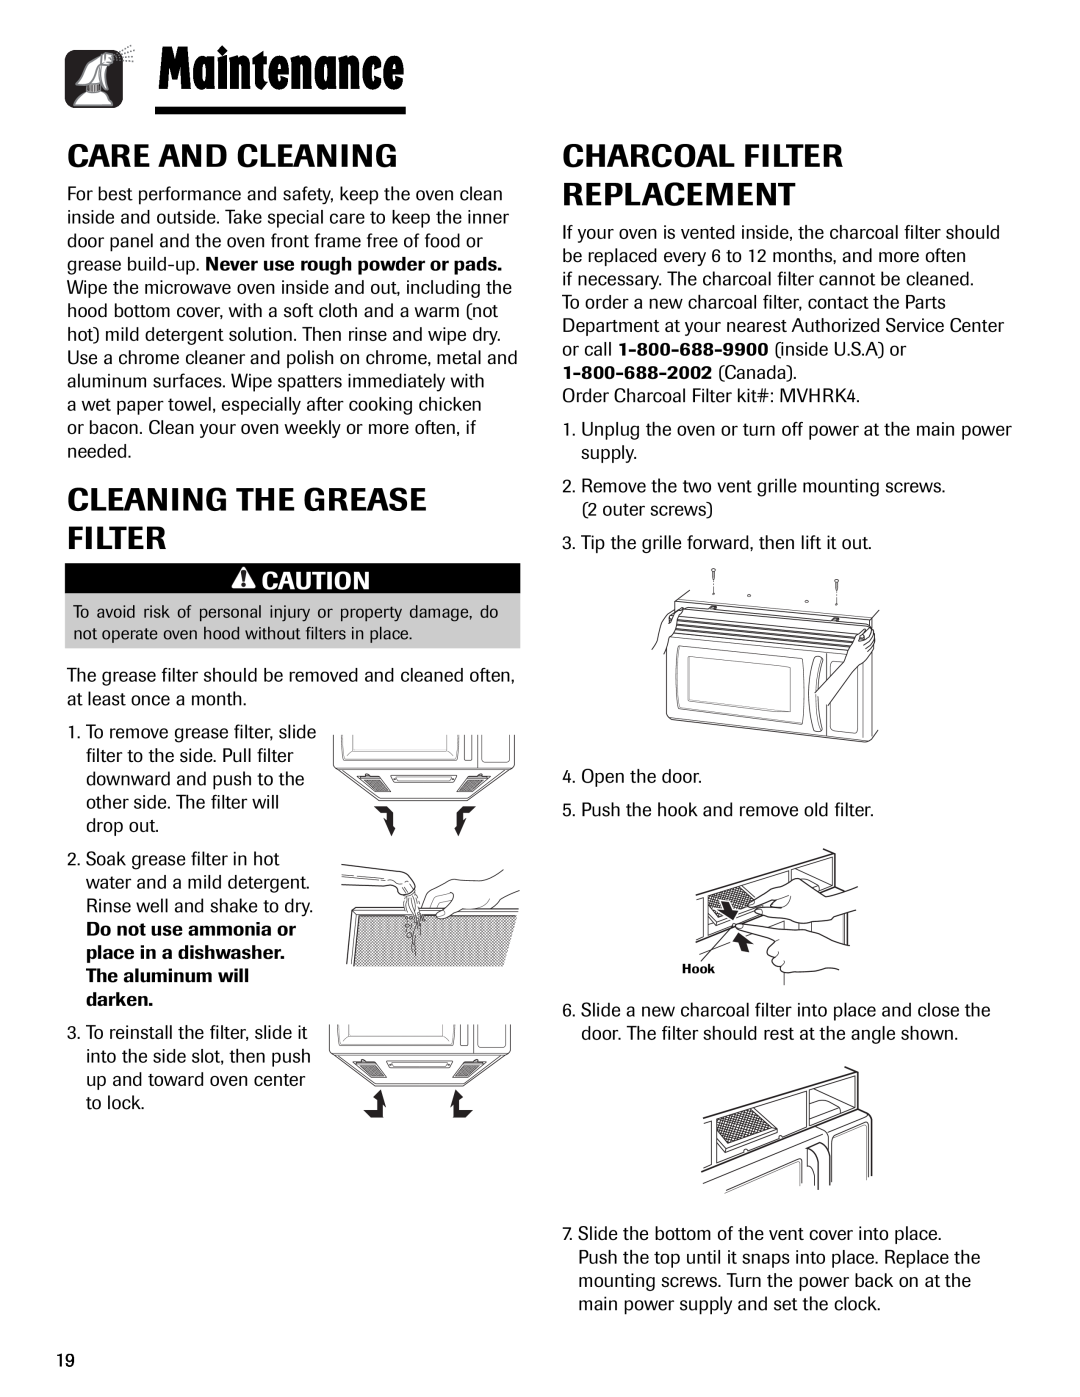 Maytag MMV1153AA Maintenance, Care And Cleaning, Cleaning The Grease Filter, Charcoal Filter Replacement 